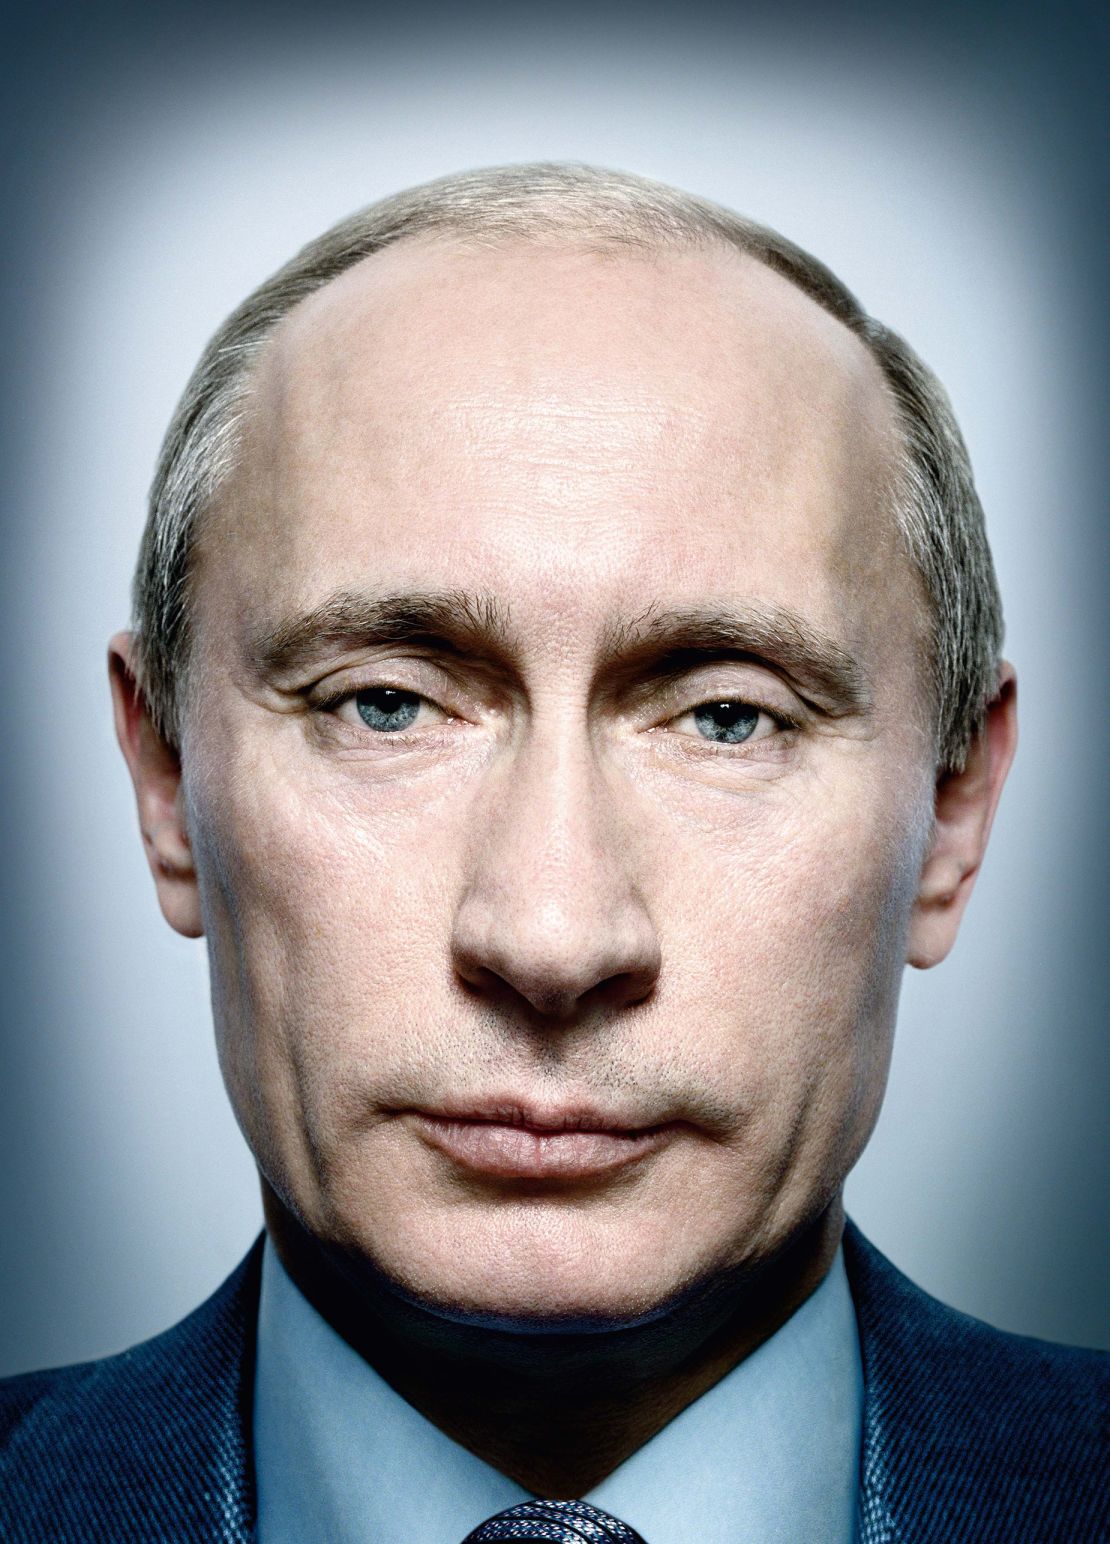 Vladimir Putin apparently initially liked his Platon portrait, but the photographer said the Russian president's opinion of it has changed as the years have passed.